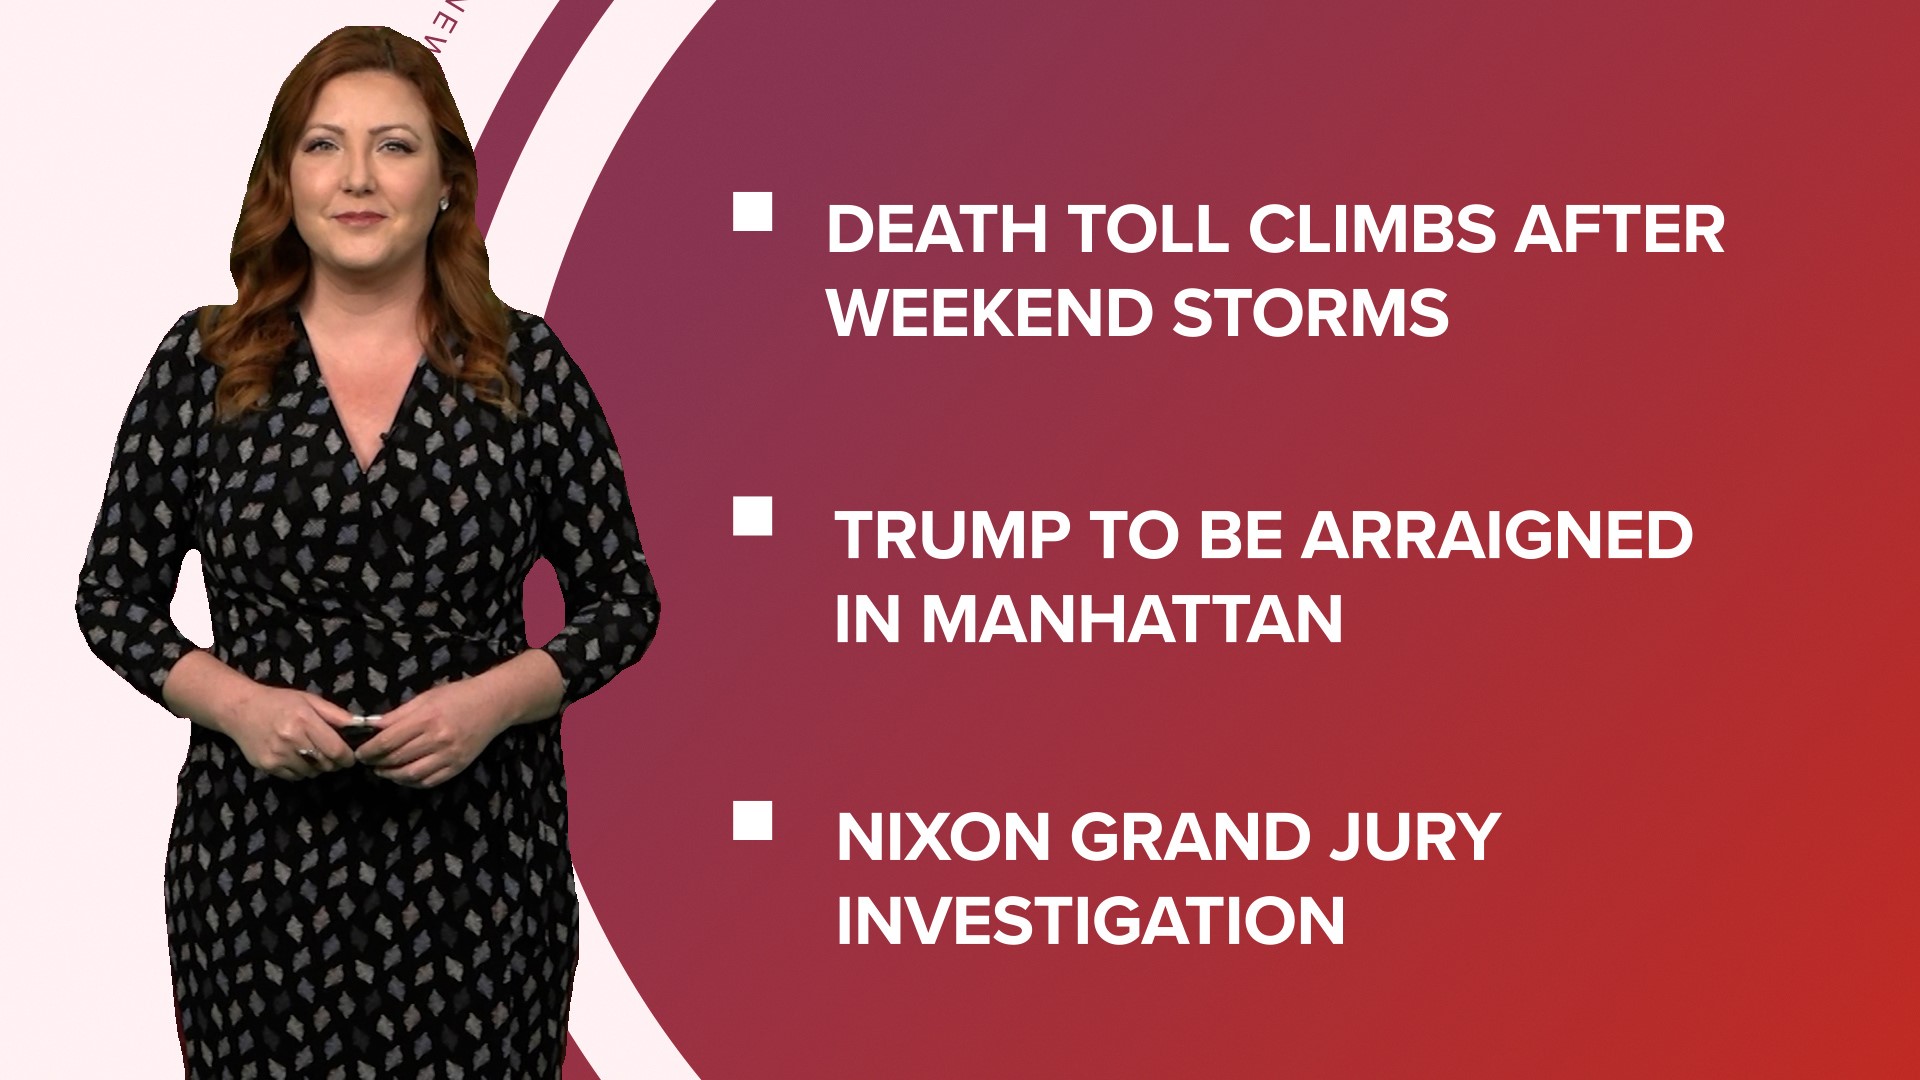 A look at what is happening in the news from storm damage aftermath in the South to former President Trump's arraignment preps and the Pope back for holy week.